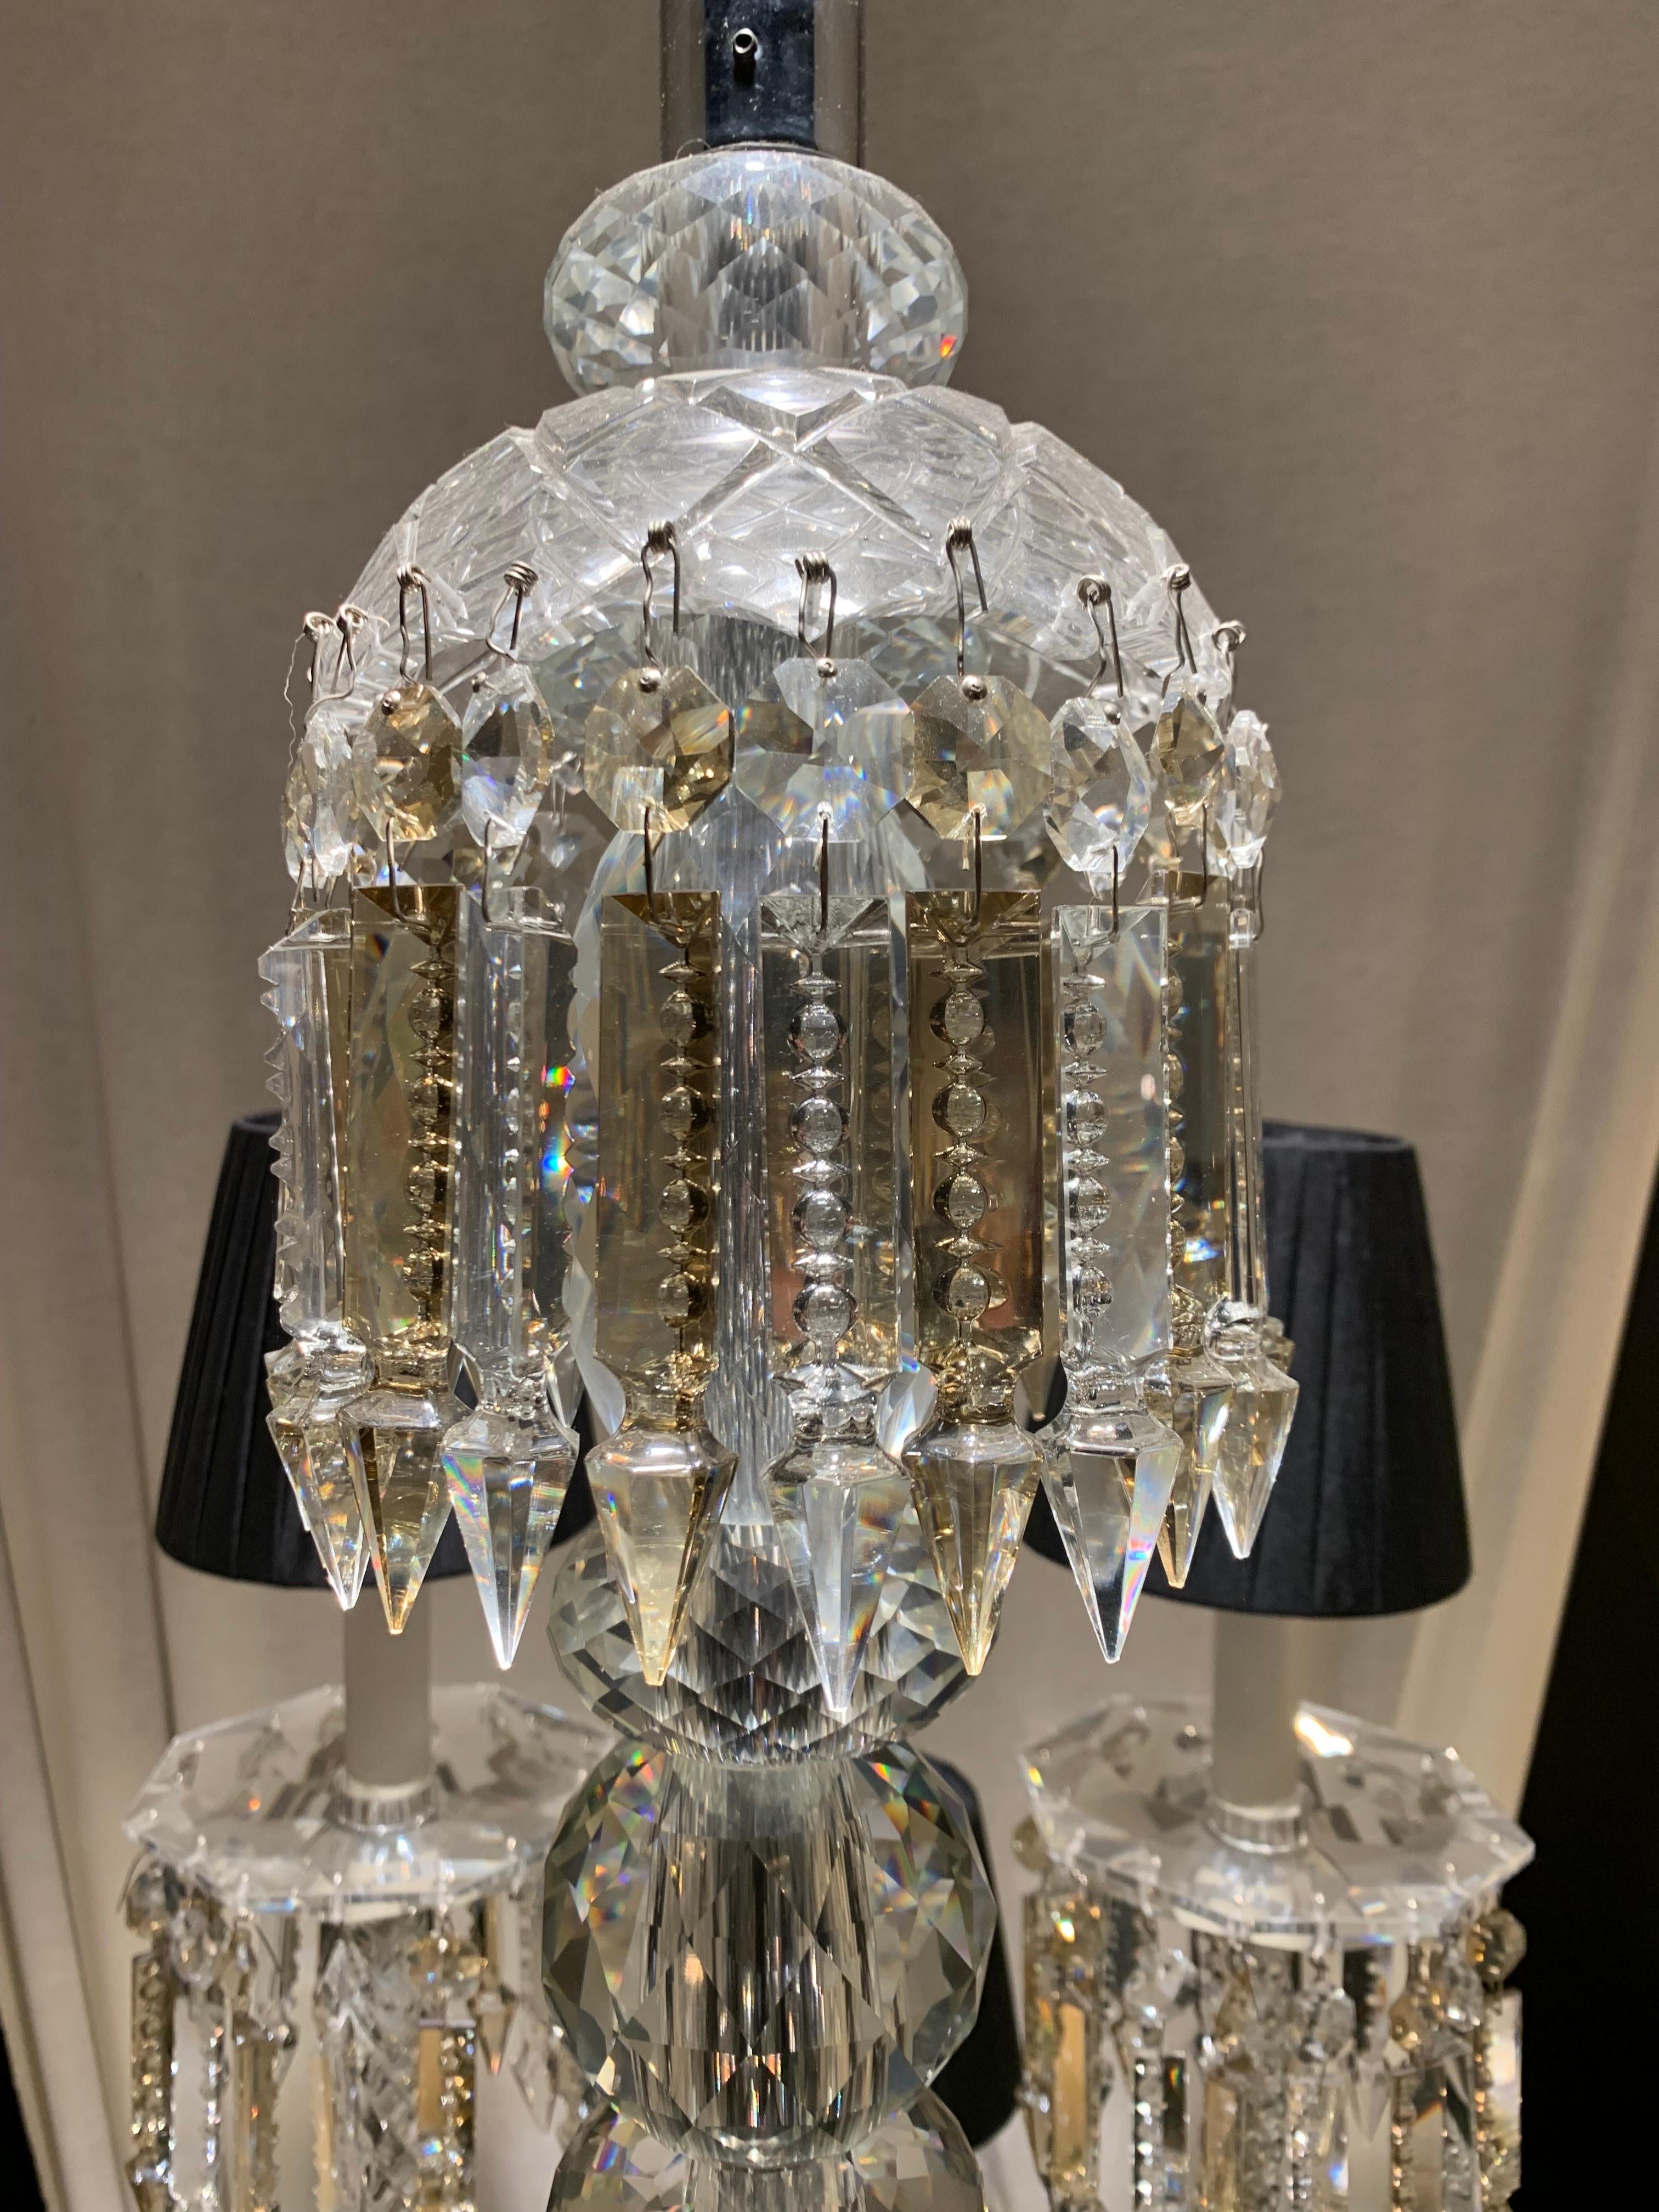 This oval chandelier is made of solid and hand cut crystal. 
It is divided into two floors. The arms of lights are in twisted glasses. The central barrel is in chromed metal covered by crystal parts.
The drops are alternated between an clear shade